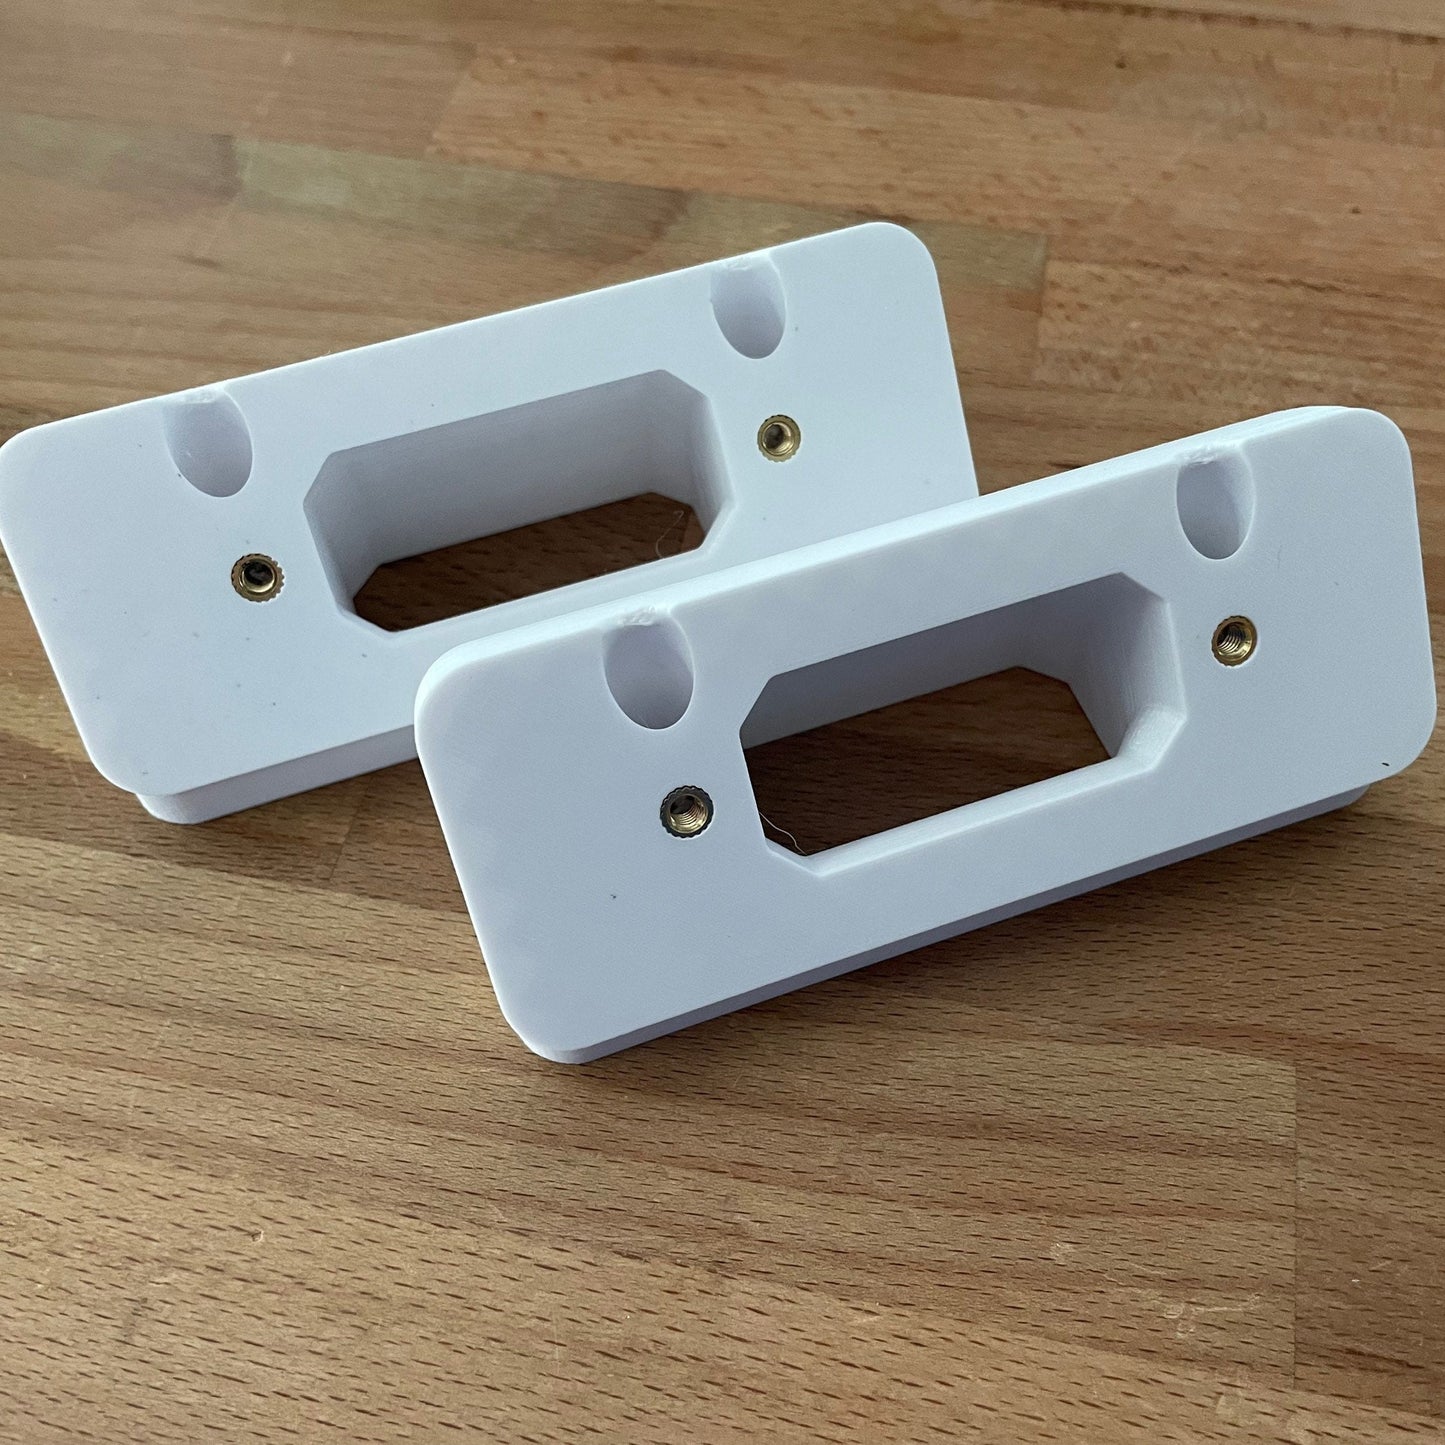 Angled Mount for Ubiquiti Unifi Protect G4 Doorbell Camera - non pro model